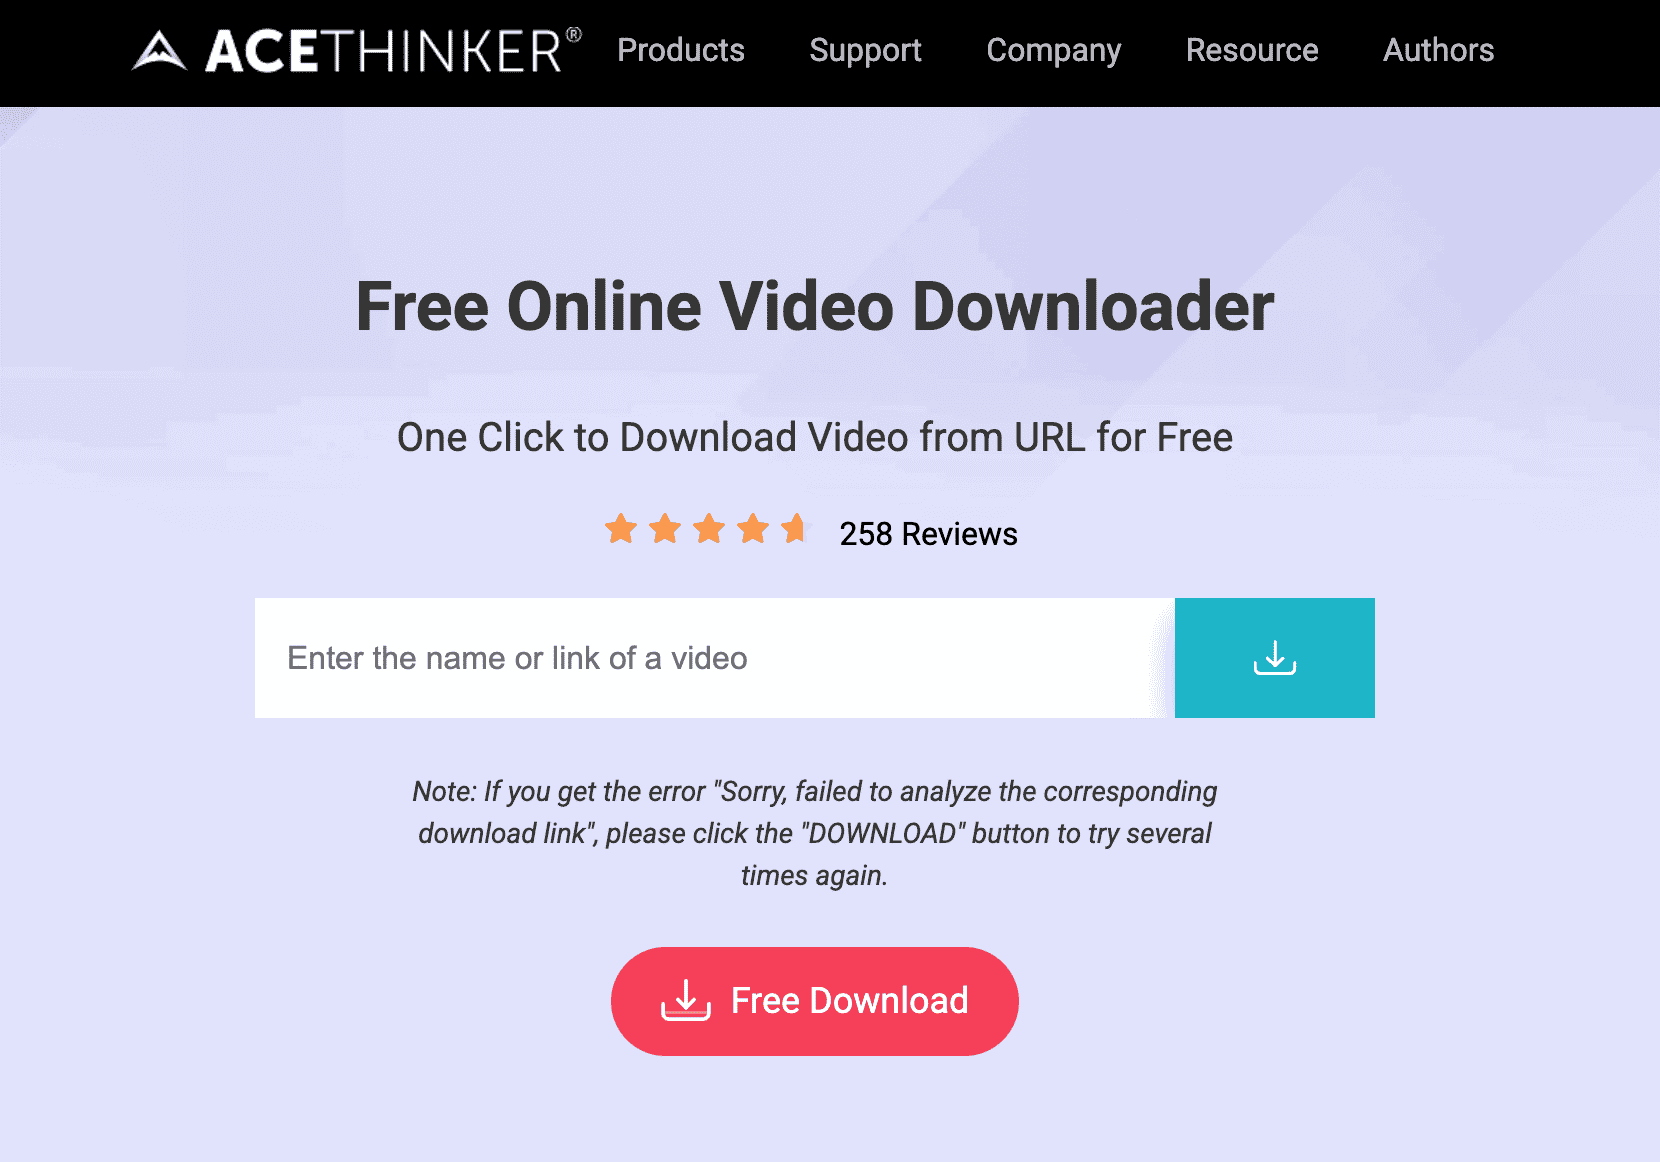 Fails to download a  video